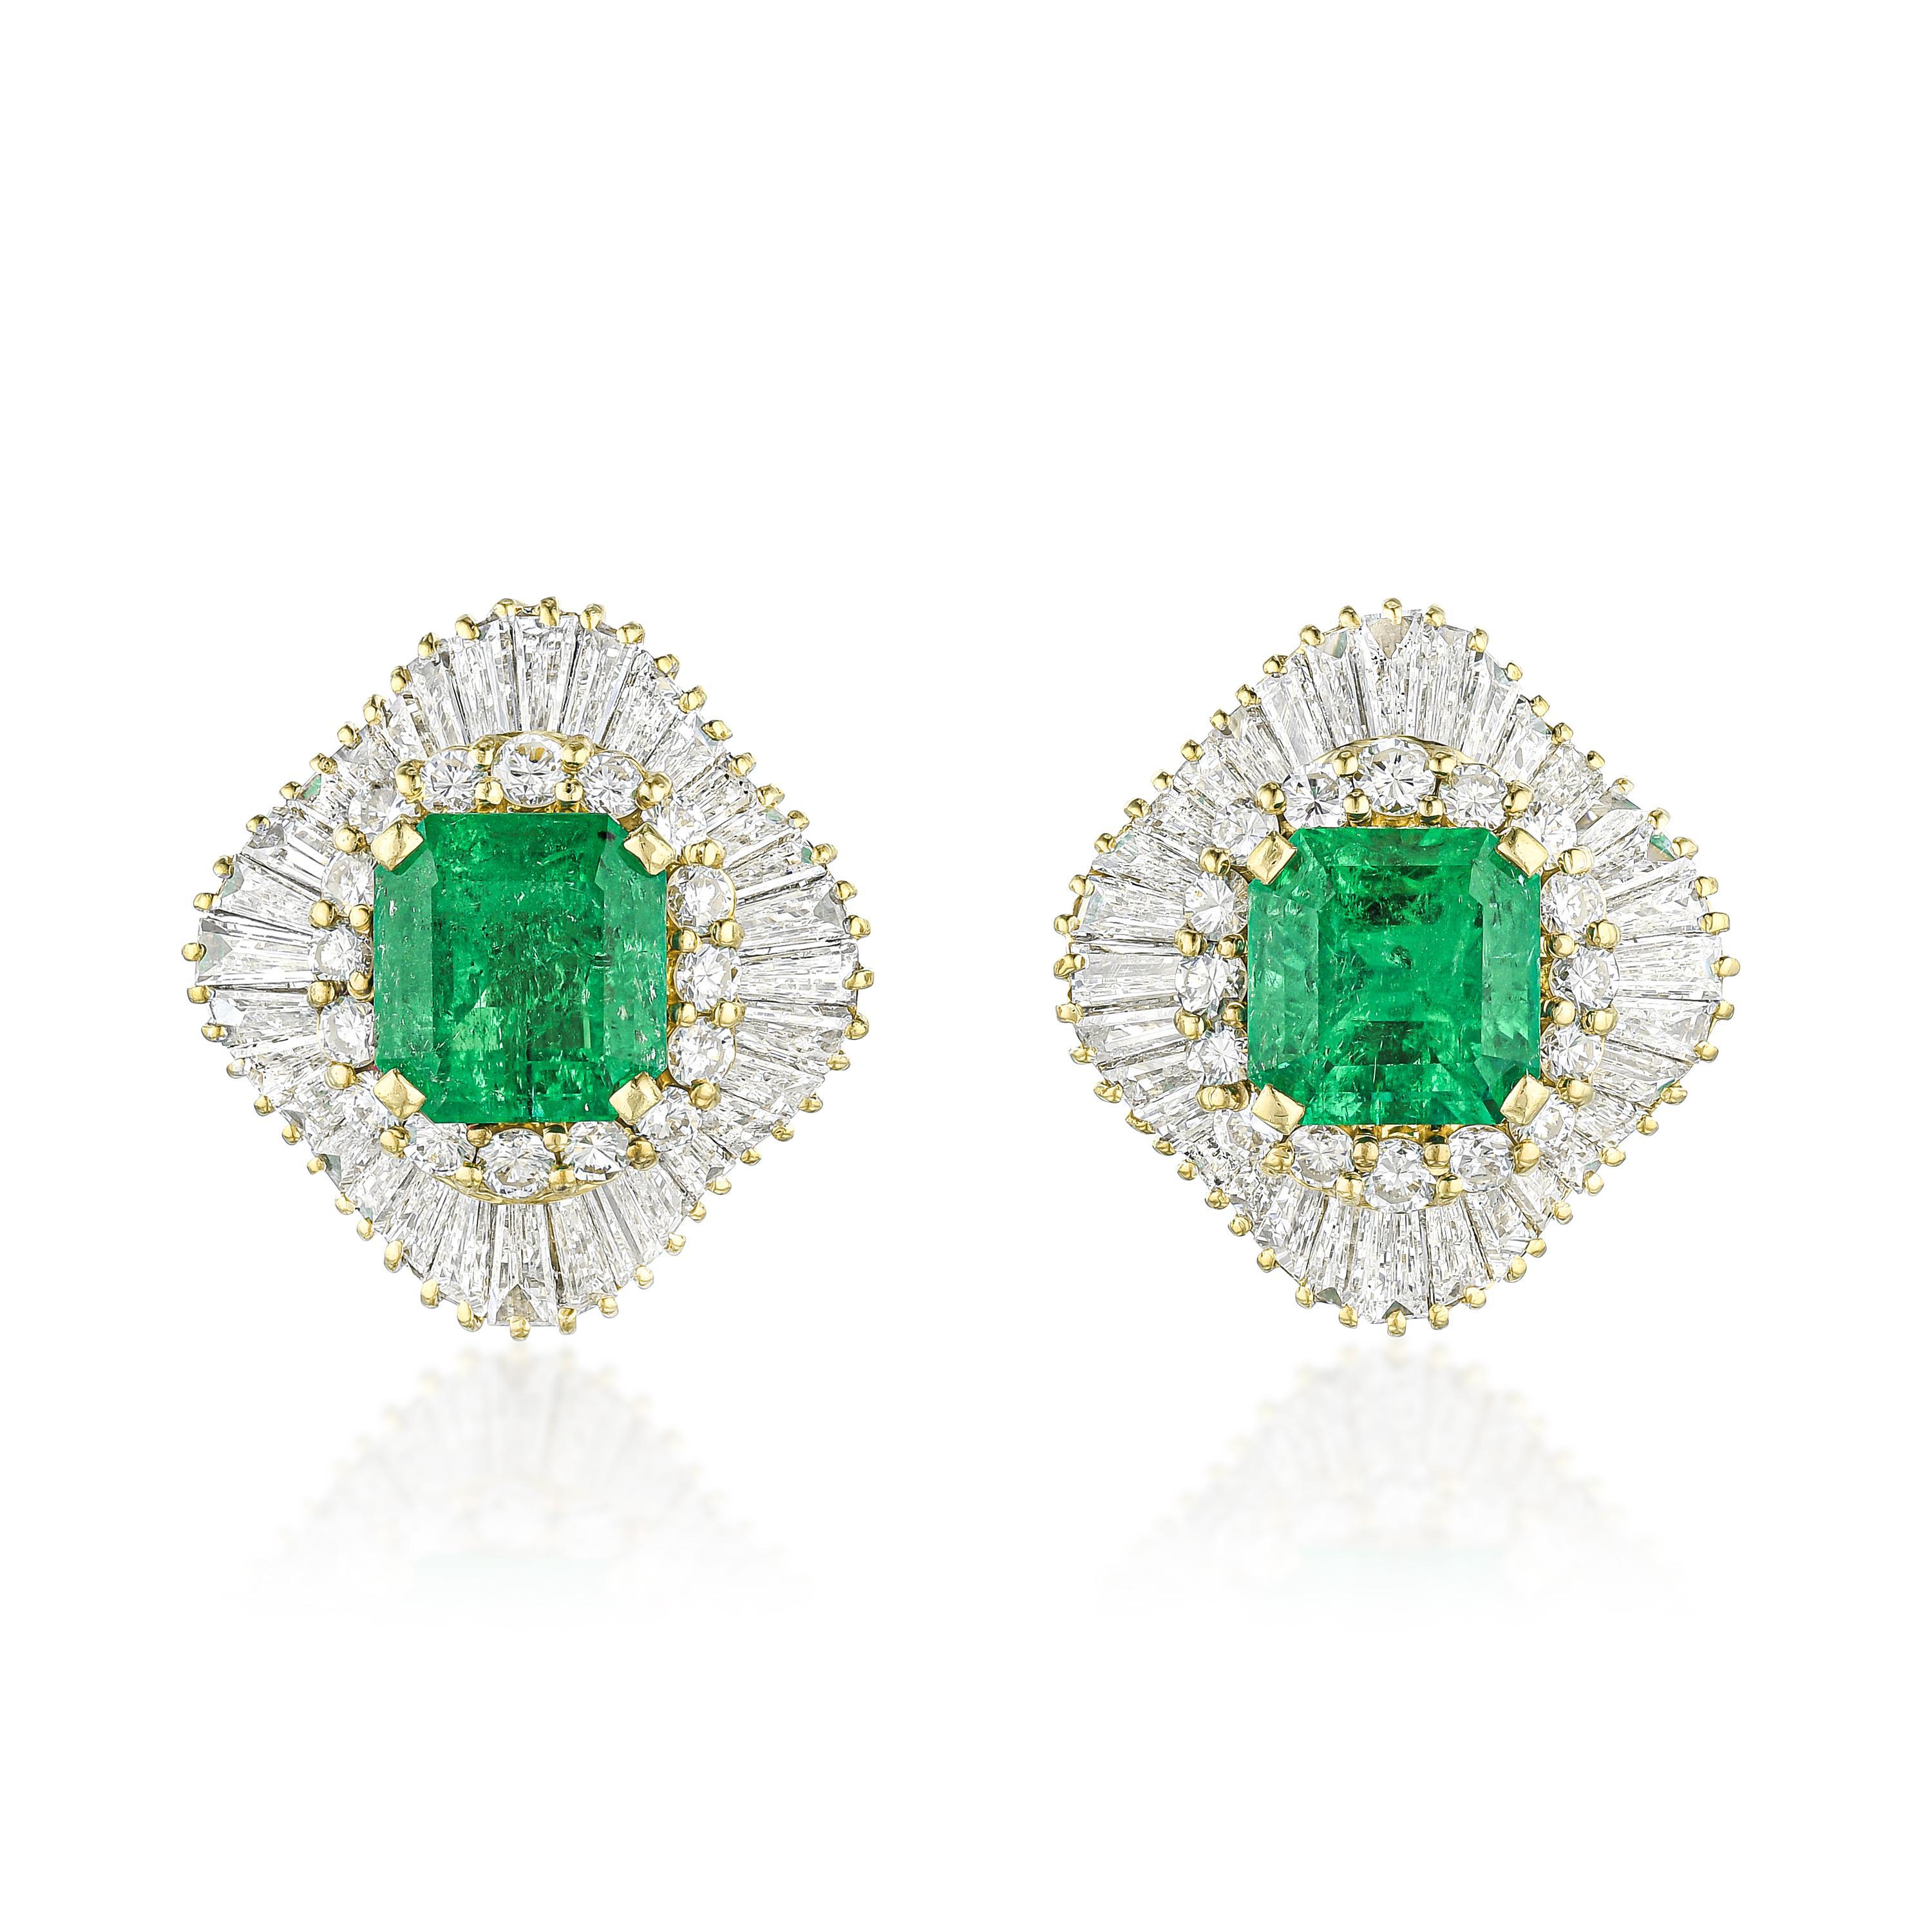 COLOMBIAN EMERALD AND DIAMOND EARRINGS  30bcd5